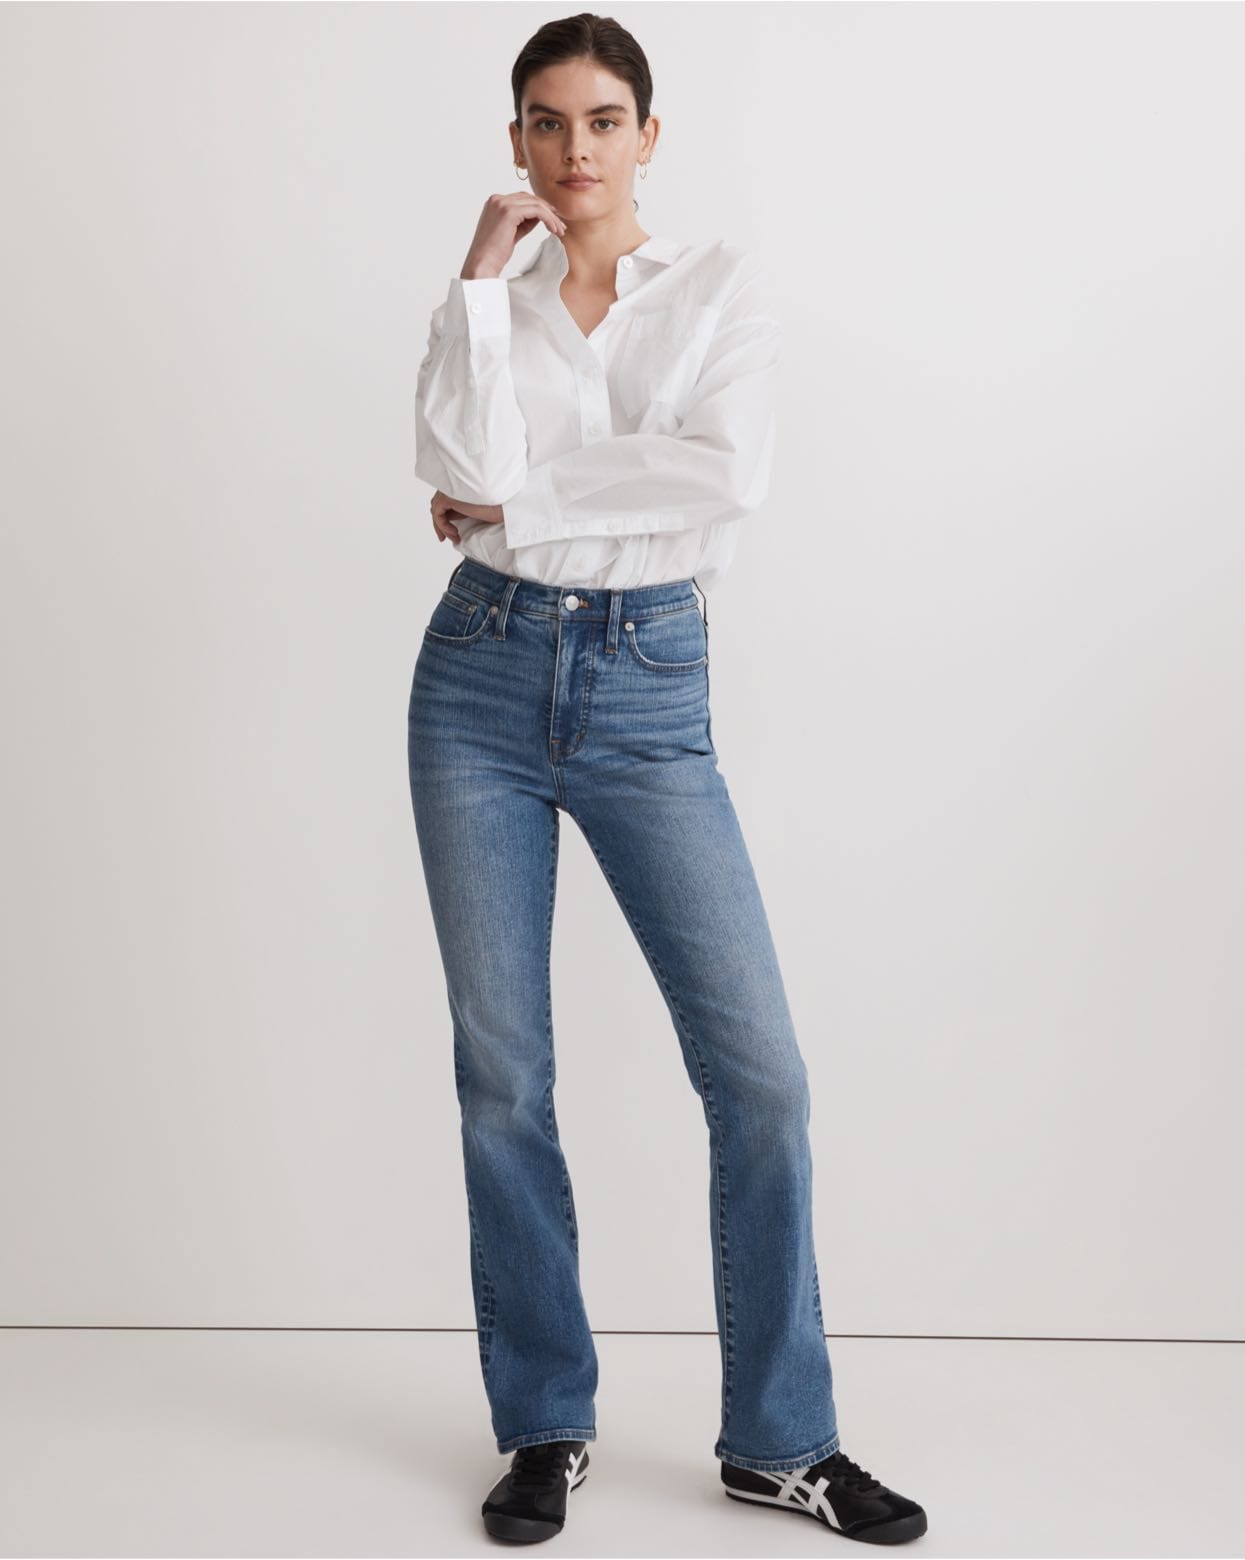 Women's Curvy Perfect Vintage Jean in Fitzgerald Wash | Madewell